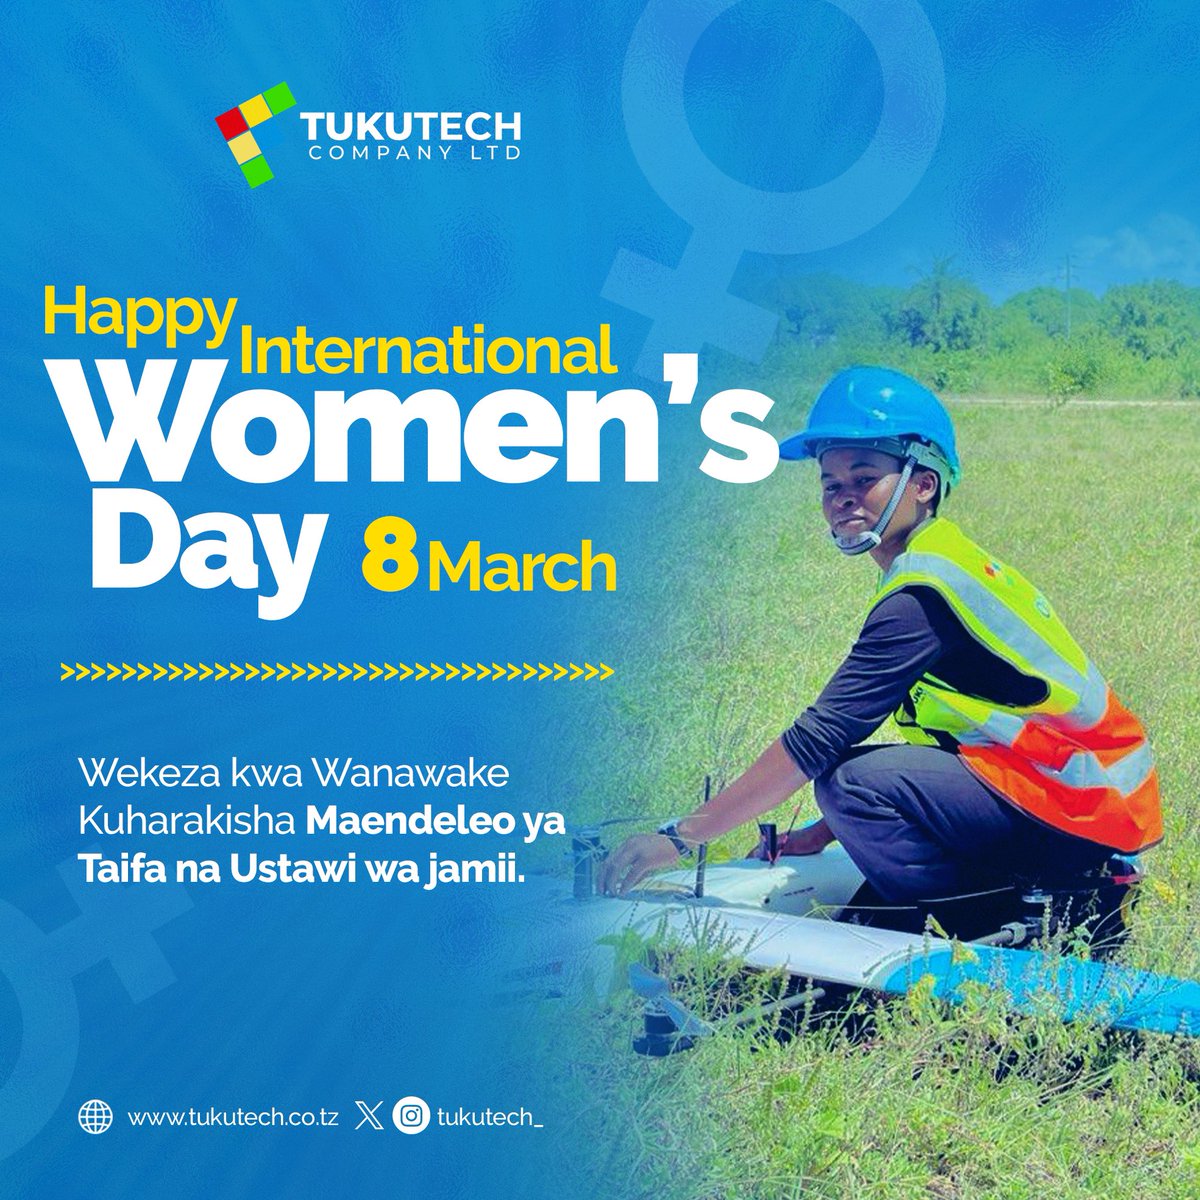 Happy International Women's Day! Let's honor the invaluable contribution of women, especially in innovative sectors like drone technology and robotics. Investing in women is investing in the future of our society. #InternationalWomenDay #Drones #Robotics